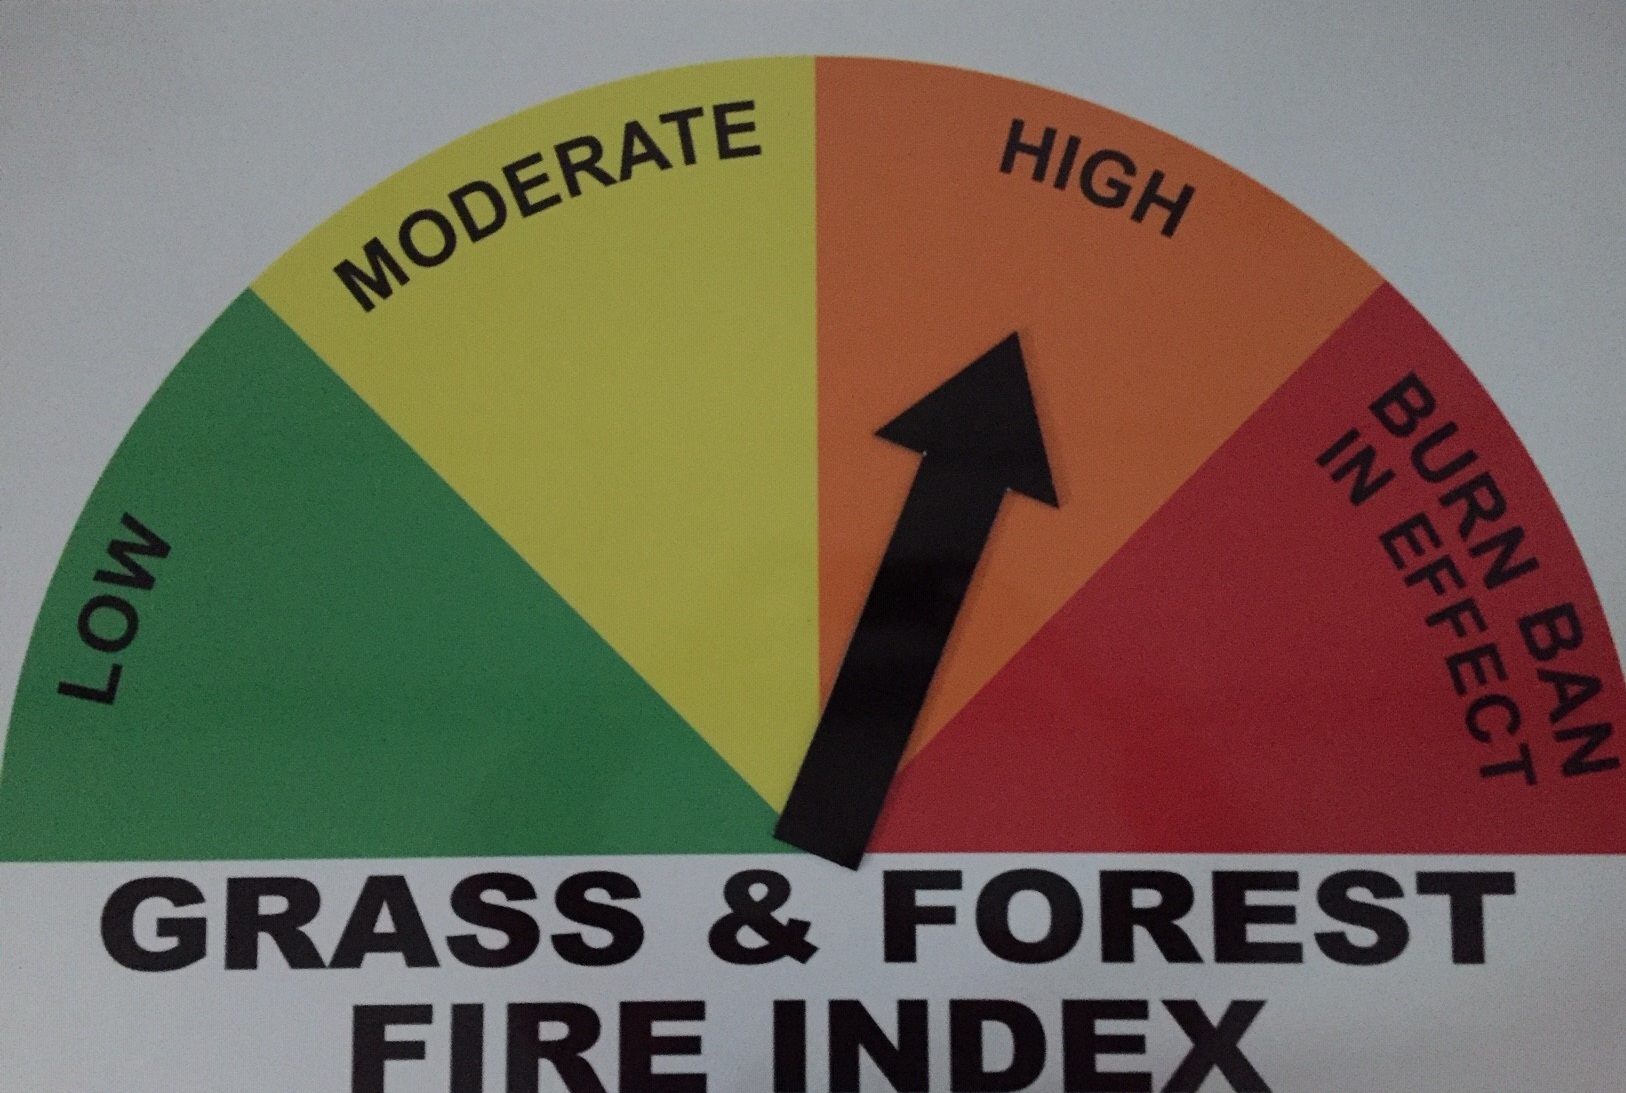 Trent Lakes Current Fire Index is High